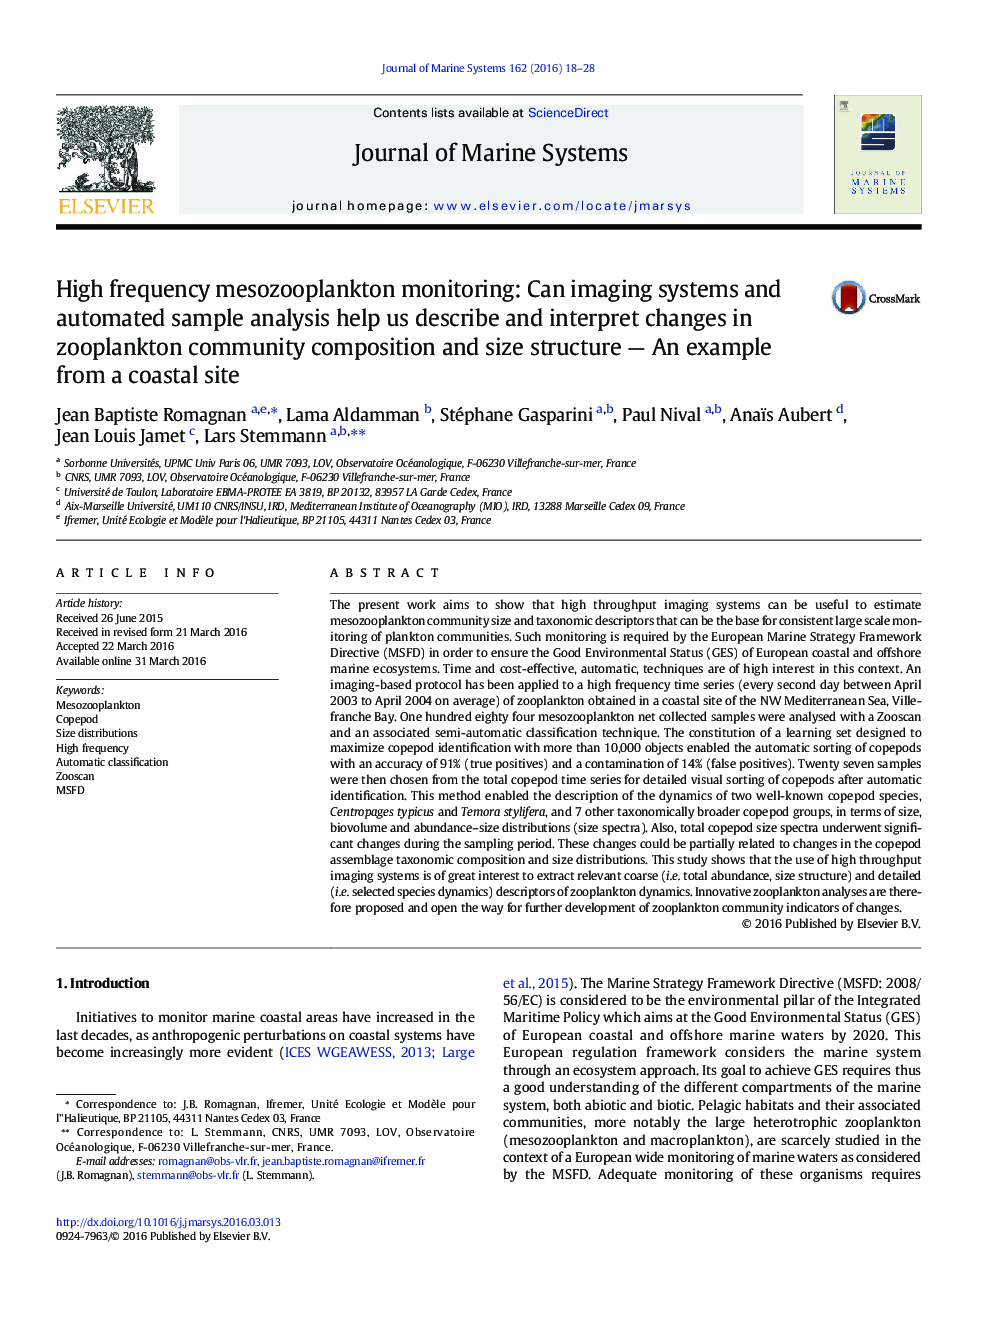 High frequency mesozooplankton monitoring: Can imaging systems and automated sample analysis help us describe and interpret changes in zooplankton community composition and size structure — An example from a coastal site